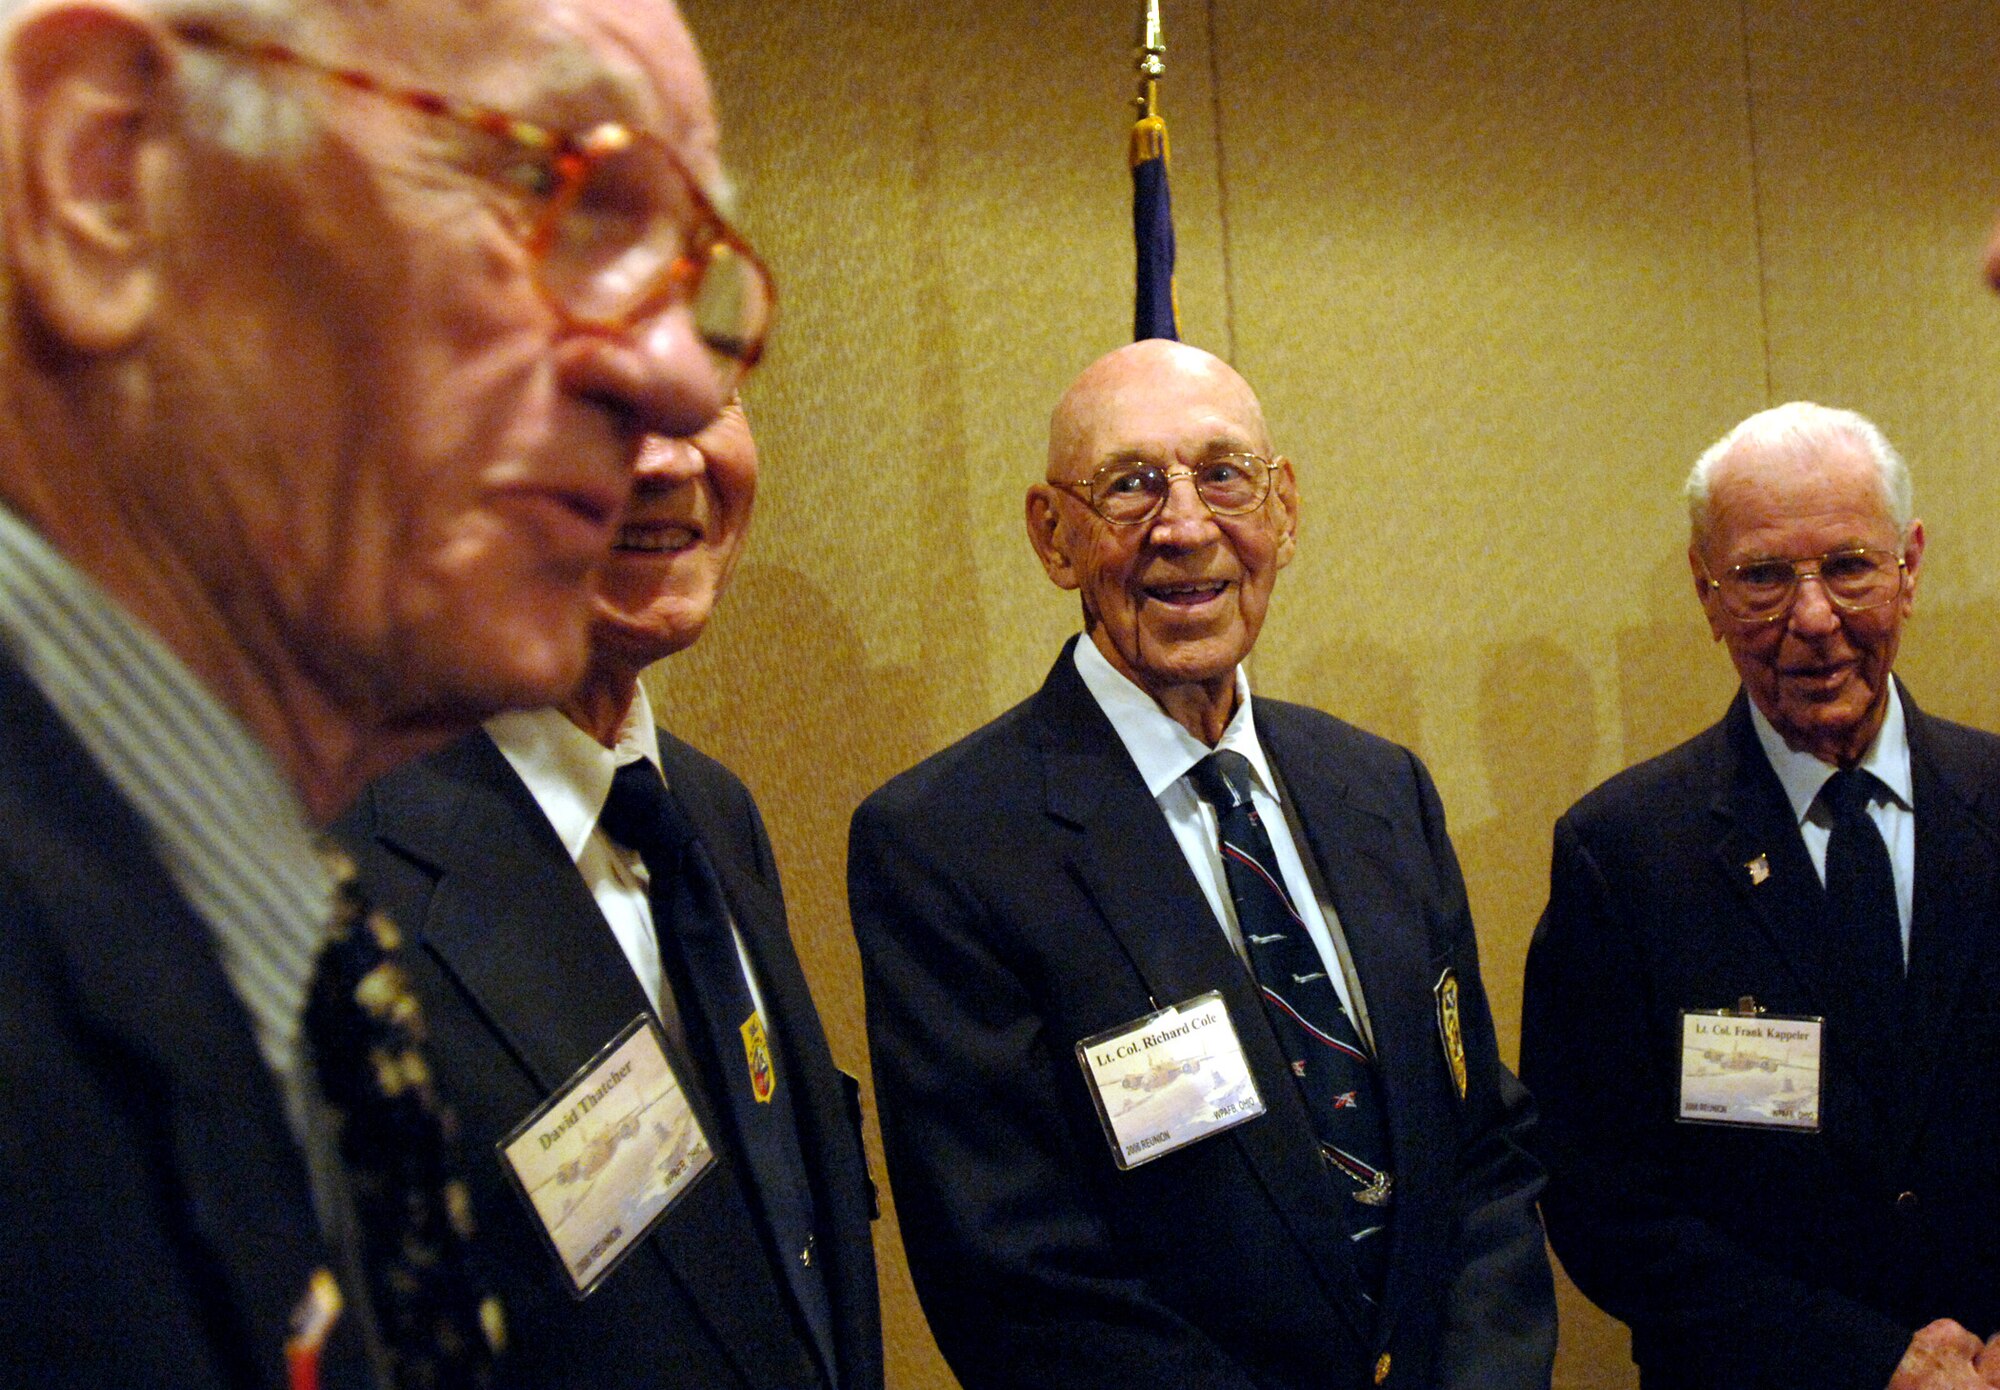 (Left to right) Tom Griffin, David Thatcher, Dick Cole and Frank Kappeler, four of the remaining 16 Doolittle Raiders, joke with attendees at the group's 64th reunion in Dayton, Ohio, on Tuesday, April 18, 2006. (U.S. Air Force photo/Tech. Sgt. Cecilio M. Ricardo Jr.)
